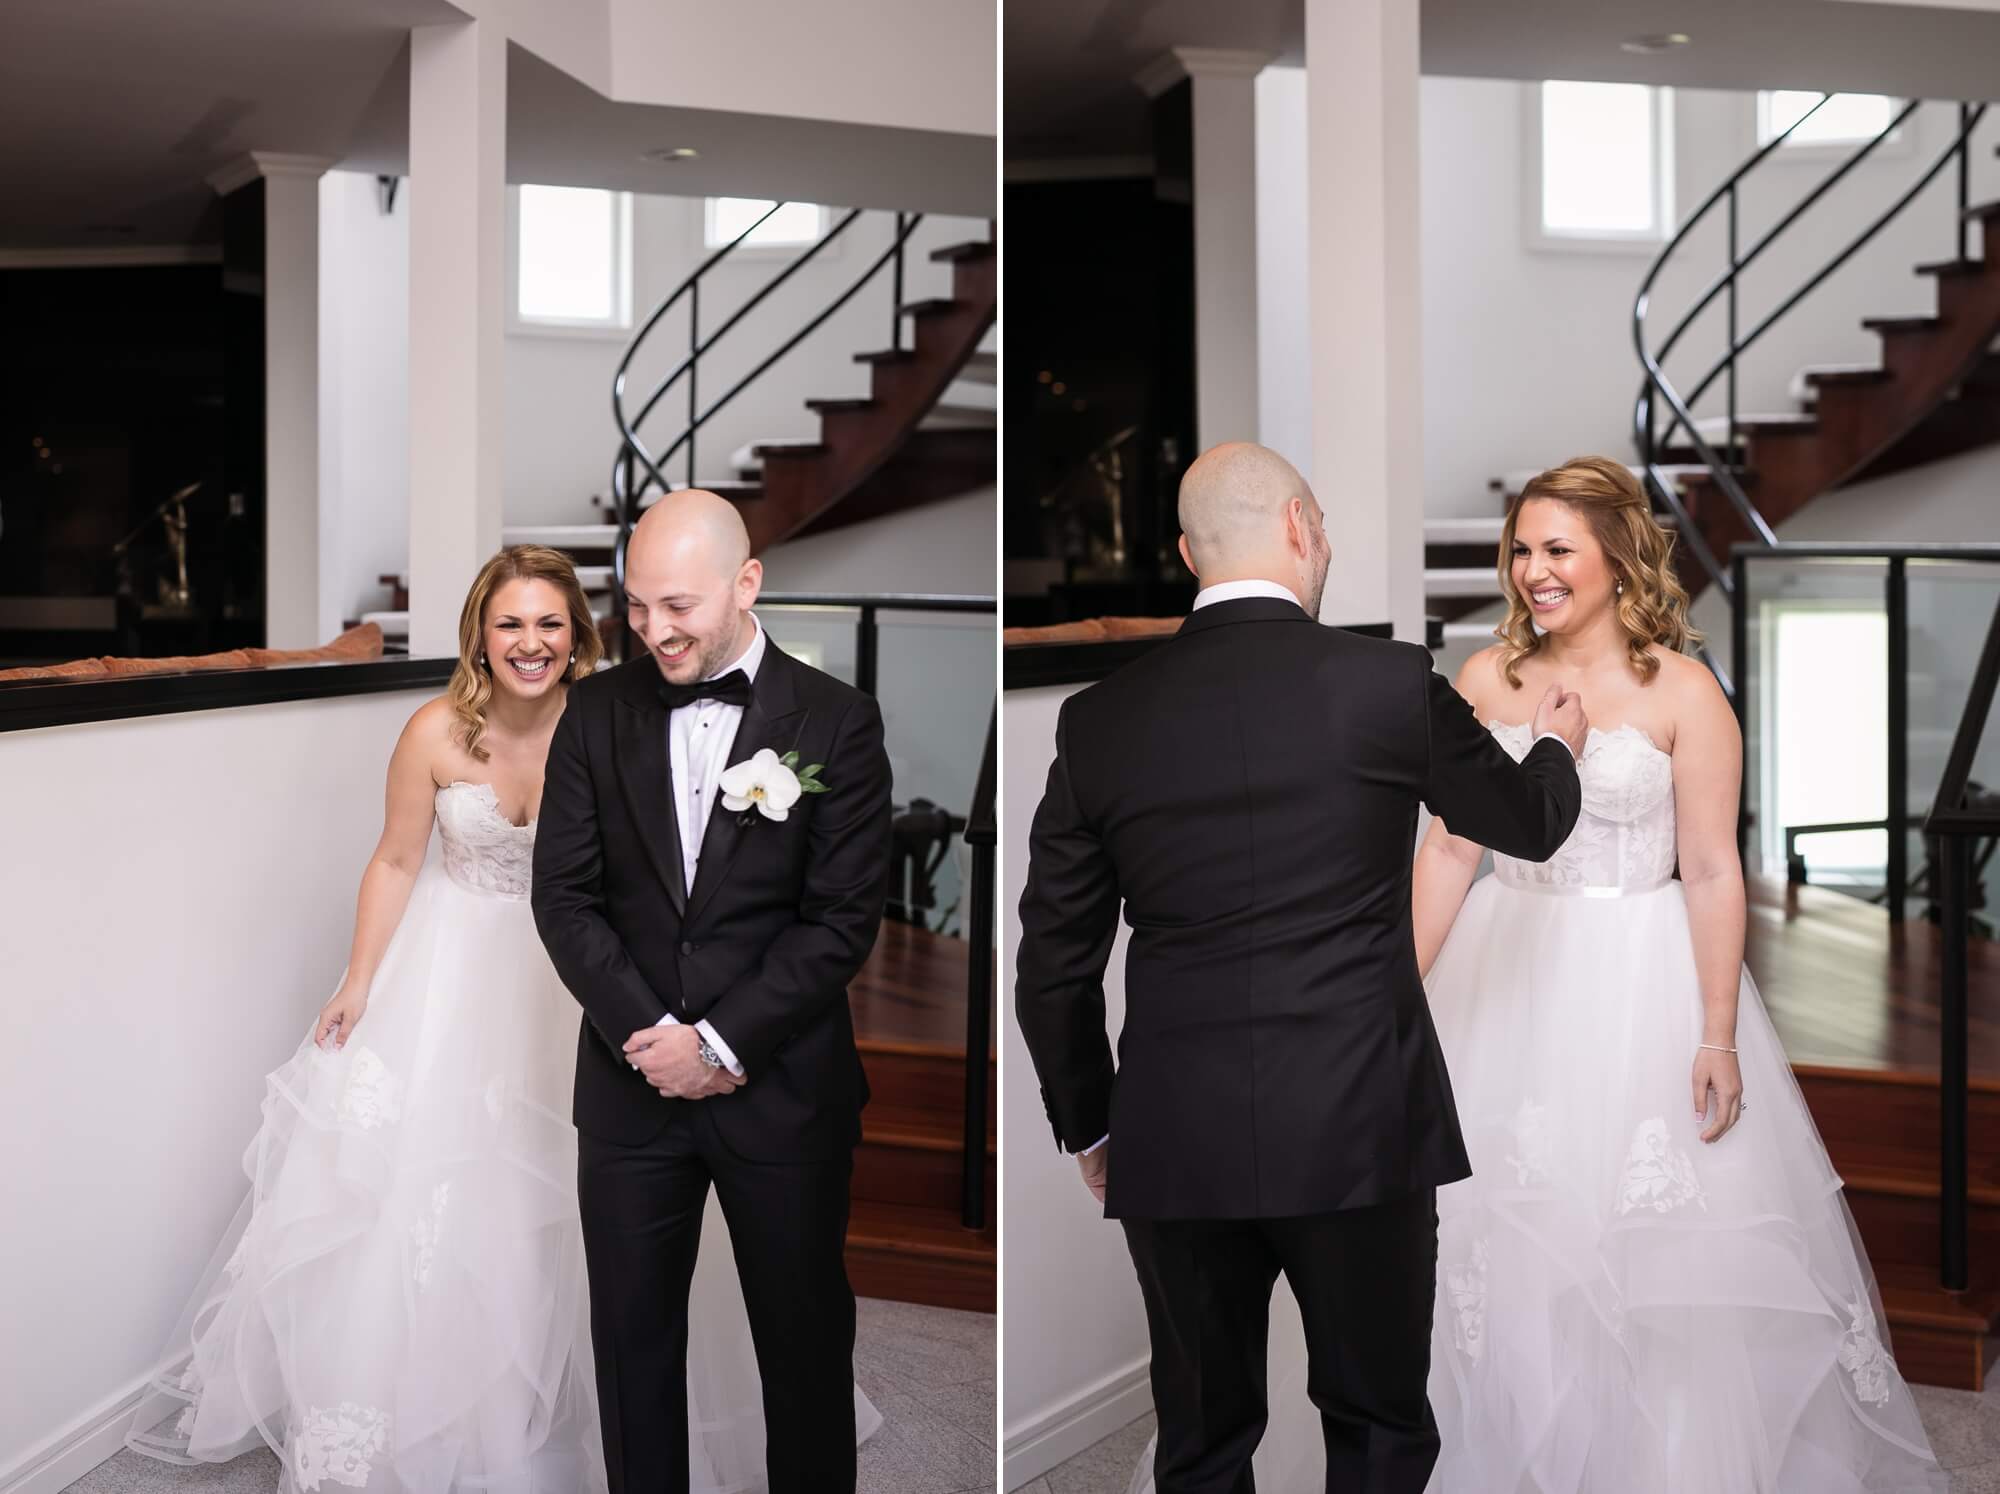 Wedding in Toronto at Eagles Nest. The bride and groom share a joyful laugh with anticipation for their first look. 